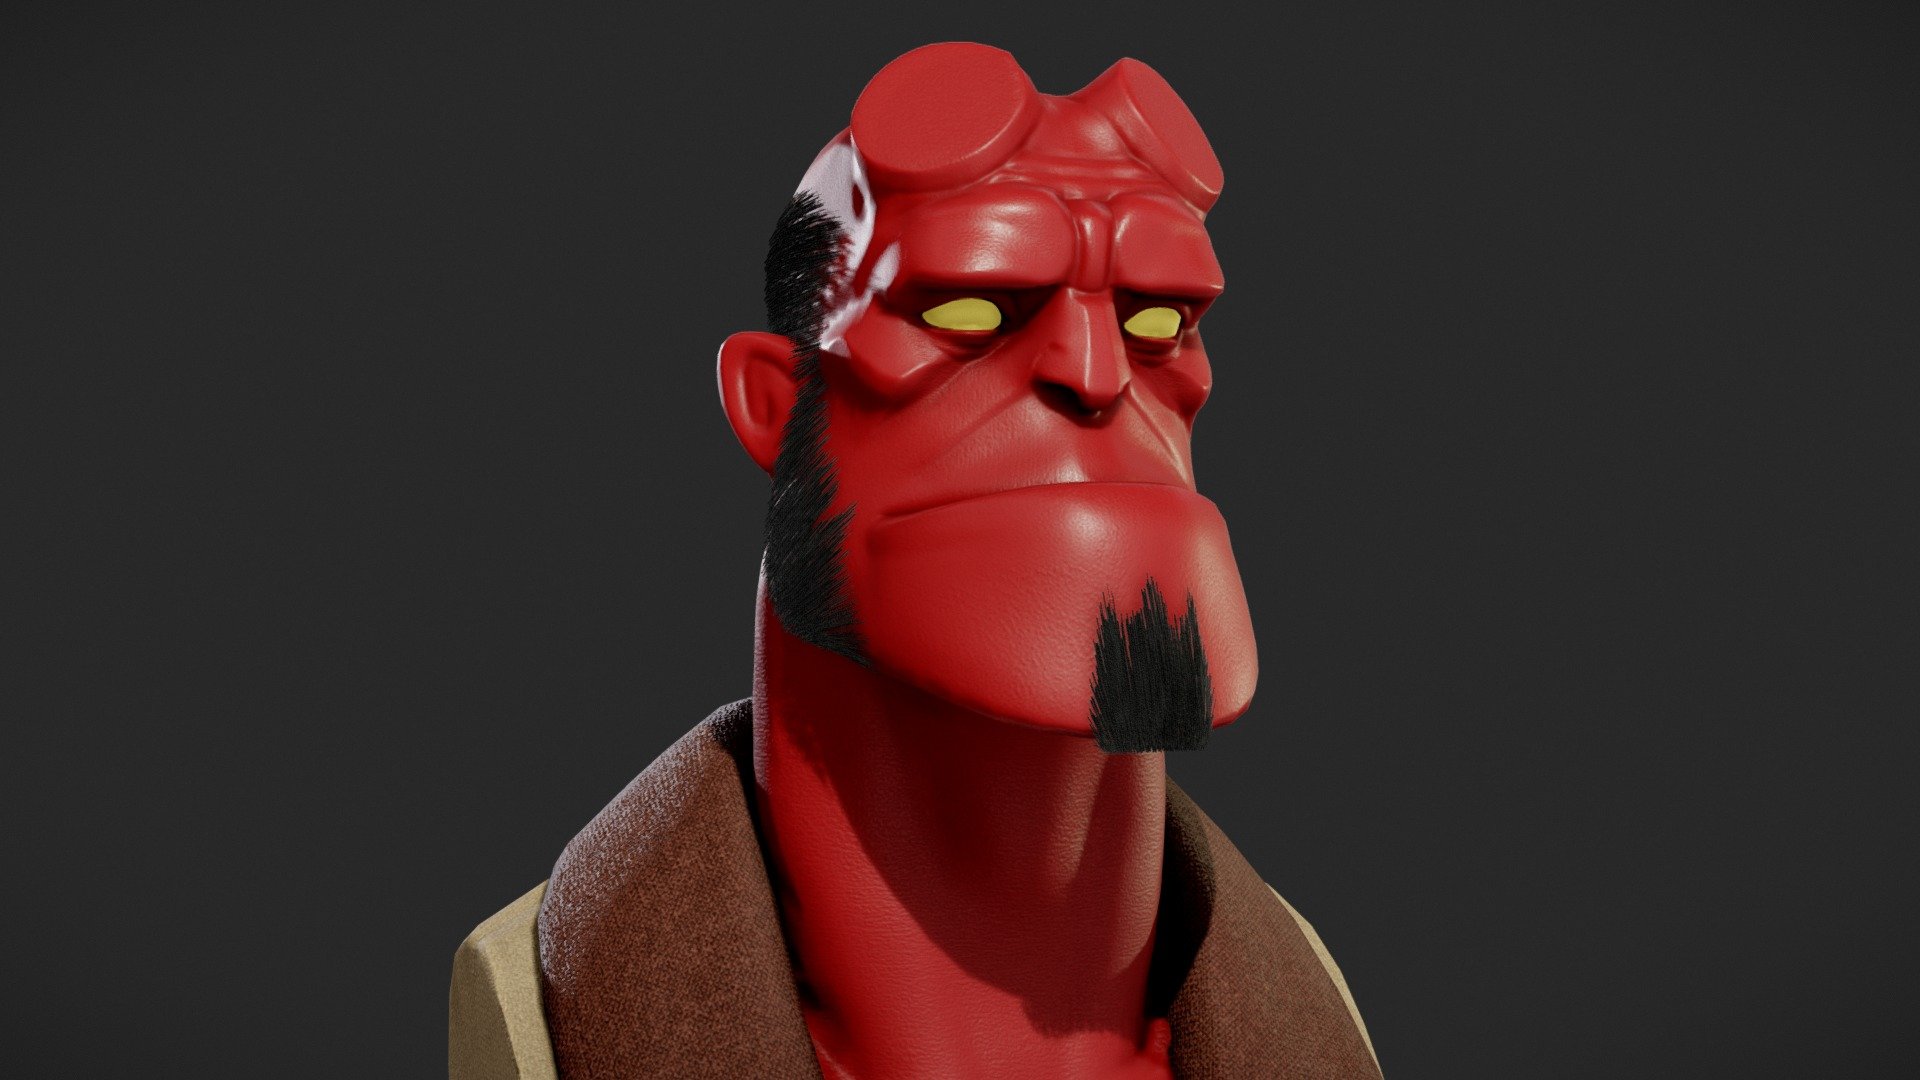 Artstation scene: https://www.artstation.com/artwork/4by9Yn
Doing a hellboy bust, just as a way to relax in some down time. Based on the comicbook version of hellboy , based heavily on the original drawings (made a little more 3d) - Hellboy Bust - 3D model by MatthewKean 3d model